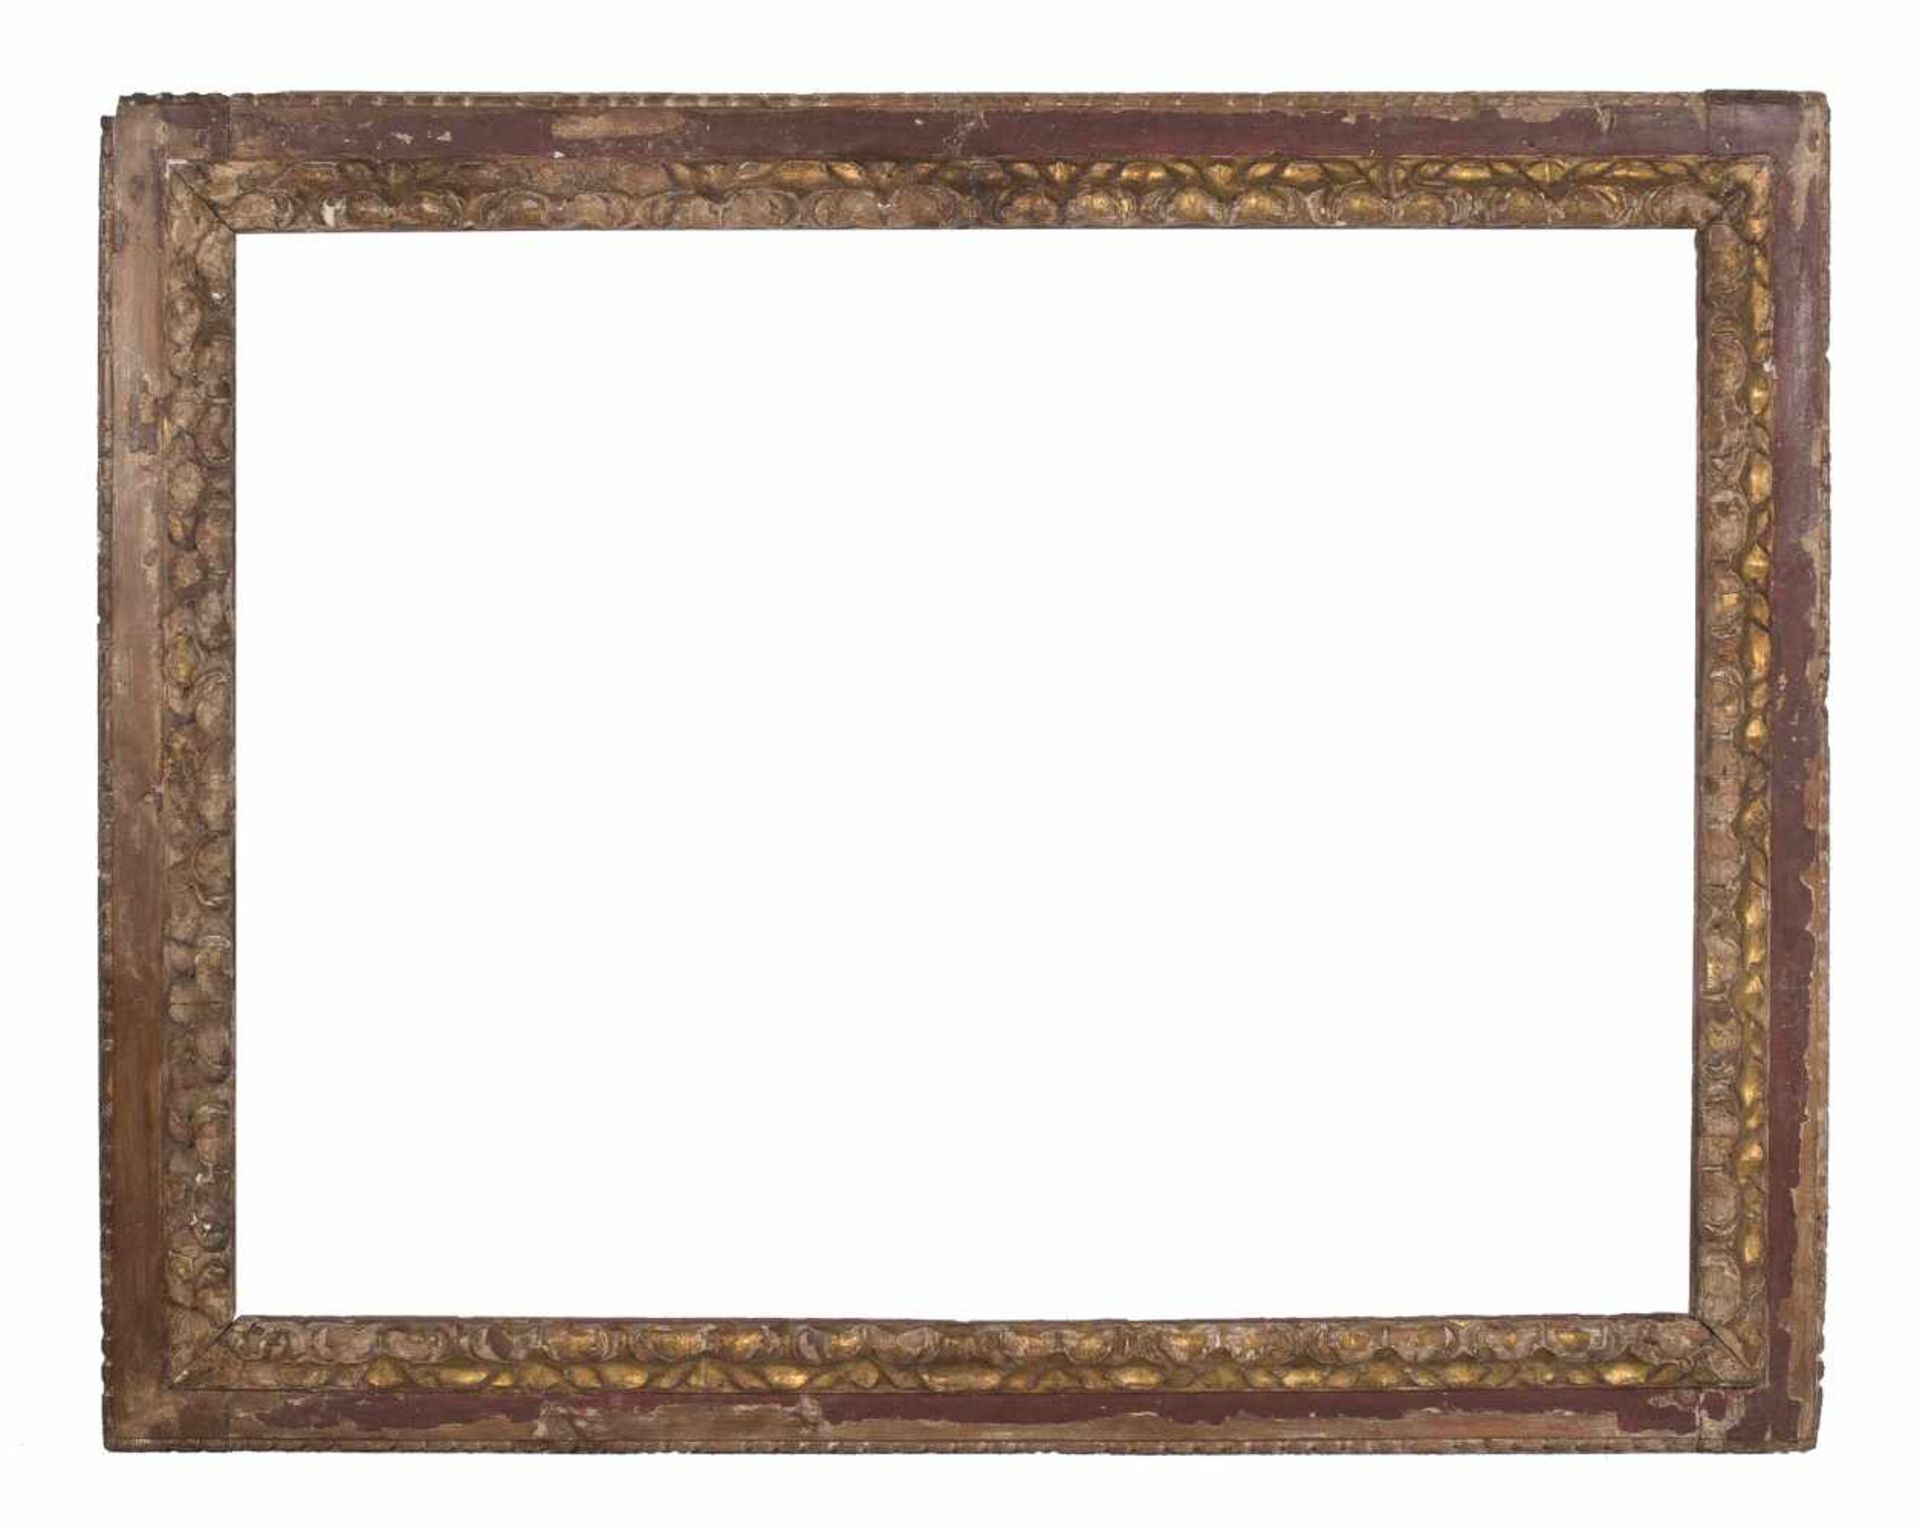 Large, carved wooden frame with polychrome and gilt residue. 17th century.